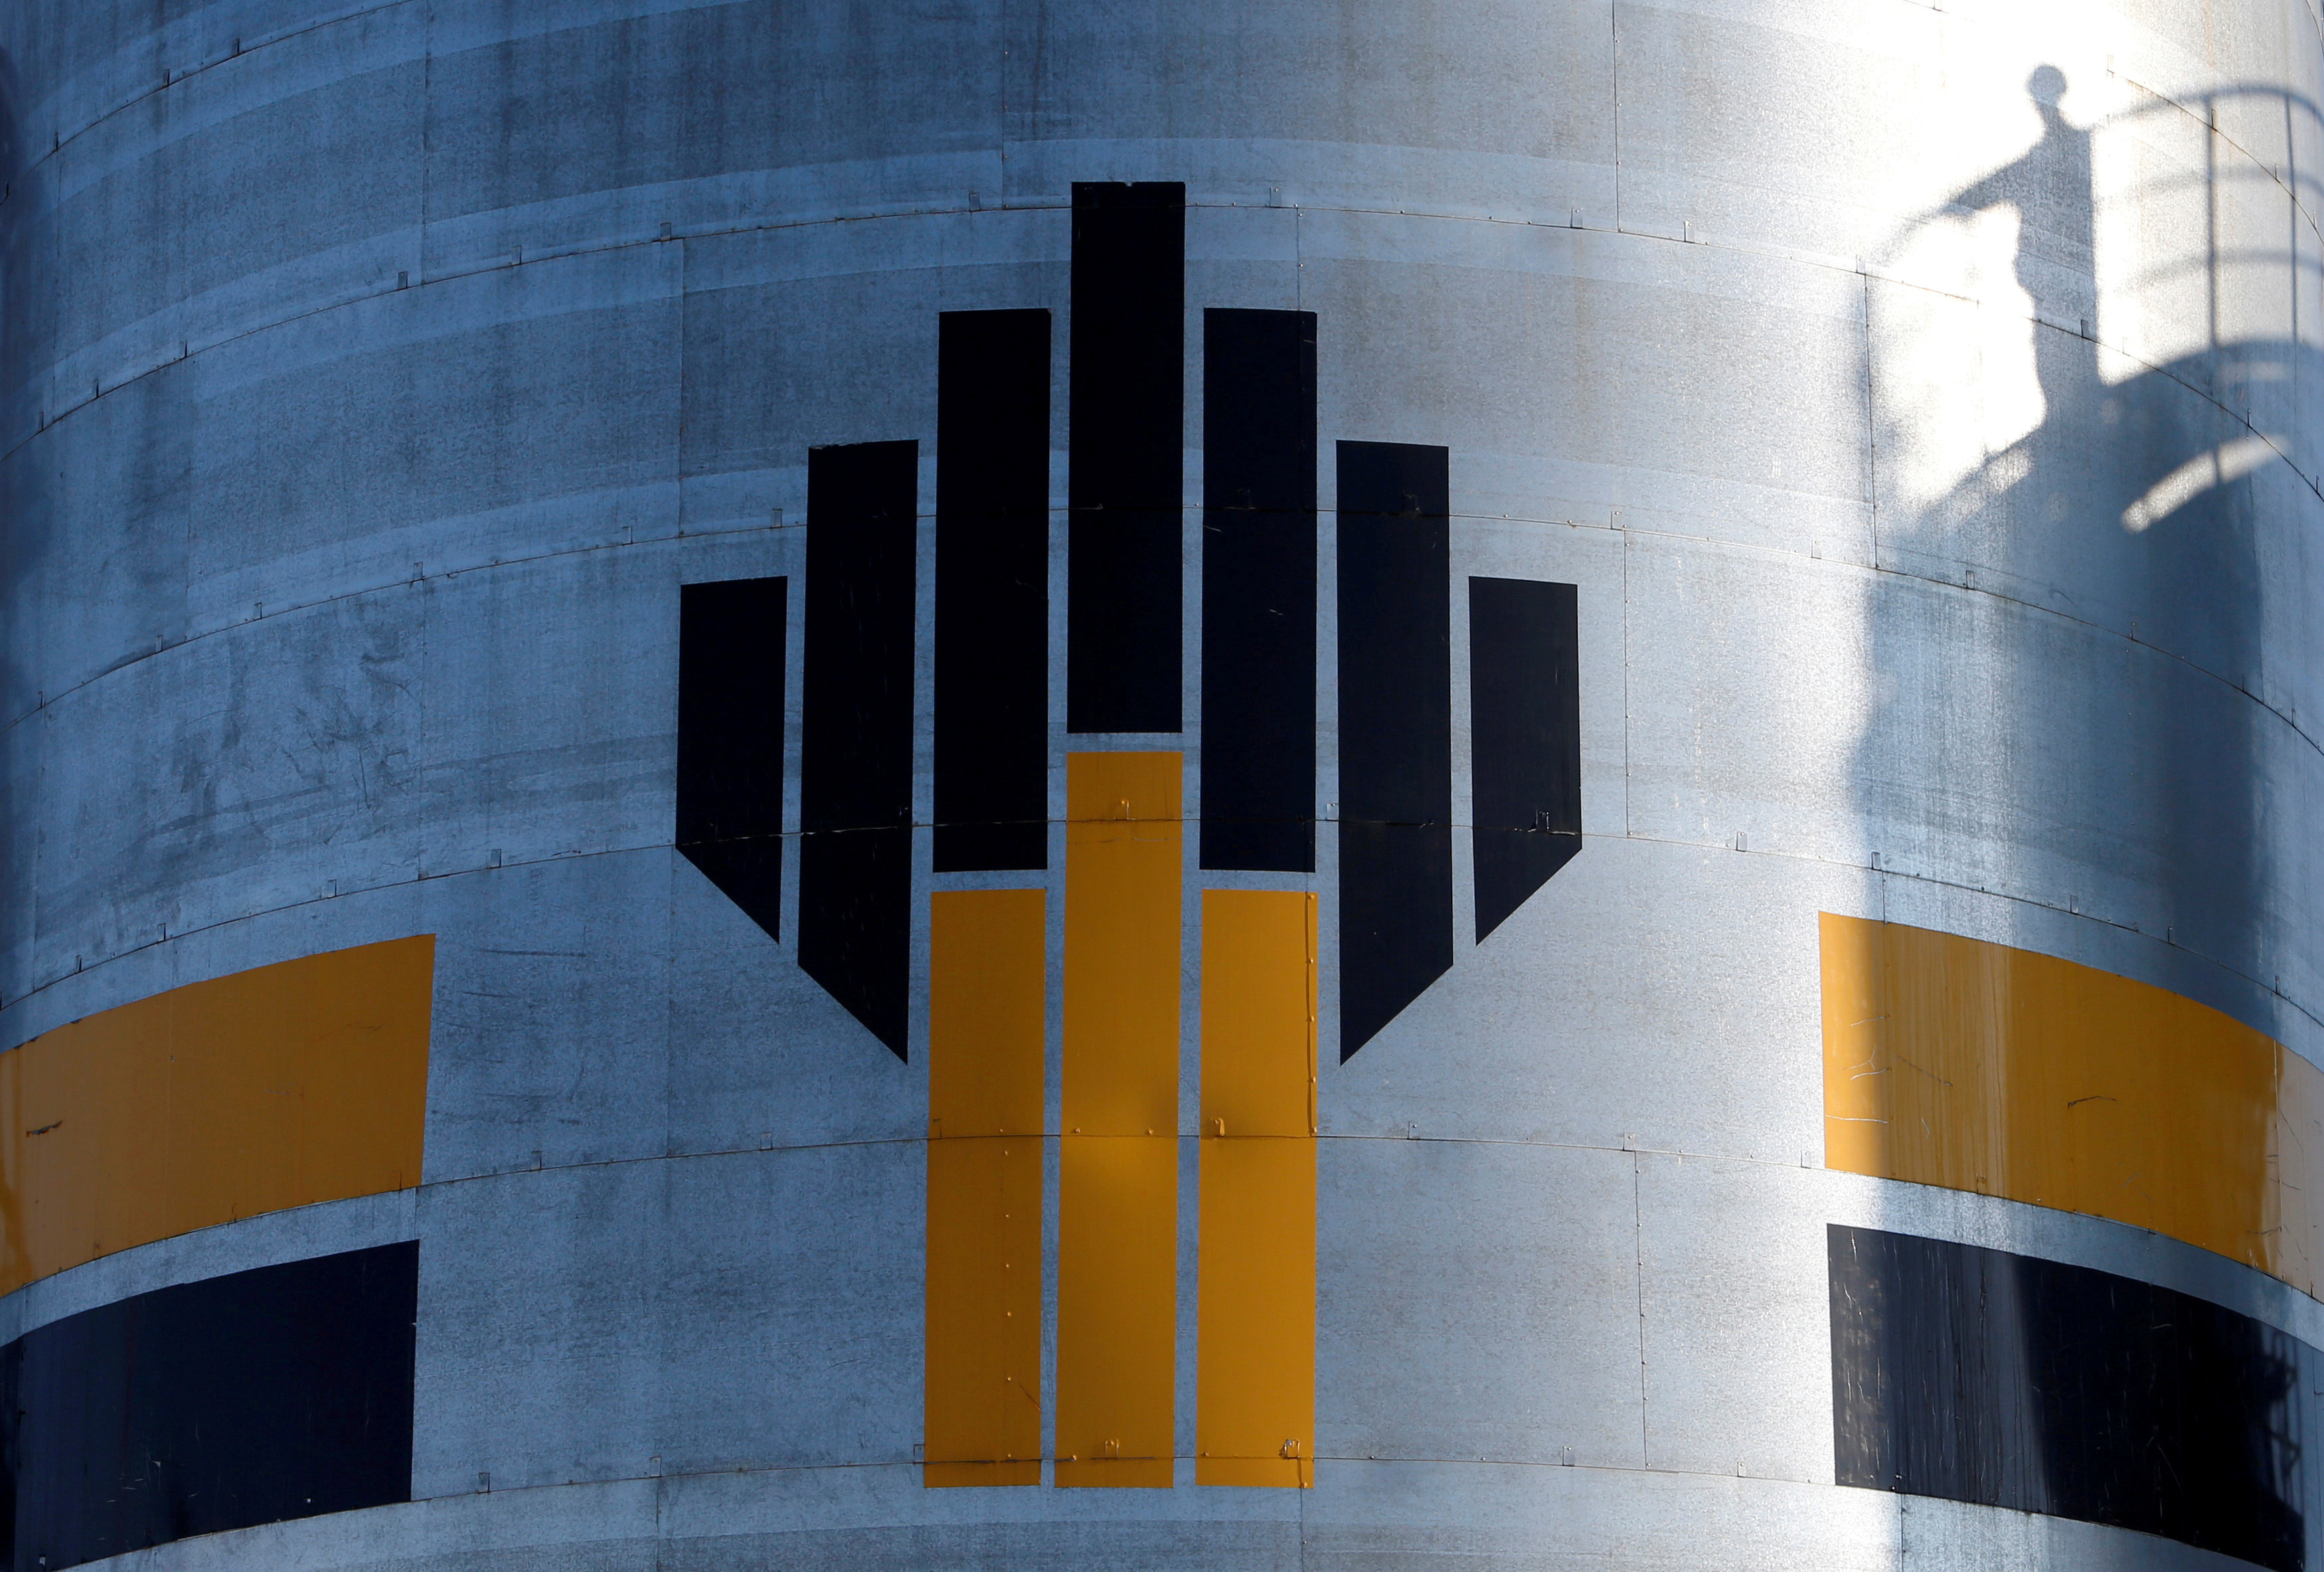 Glencore sale of Rosneft stake earns rivals' respect, bankers' relief